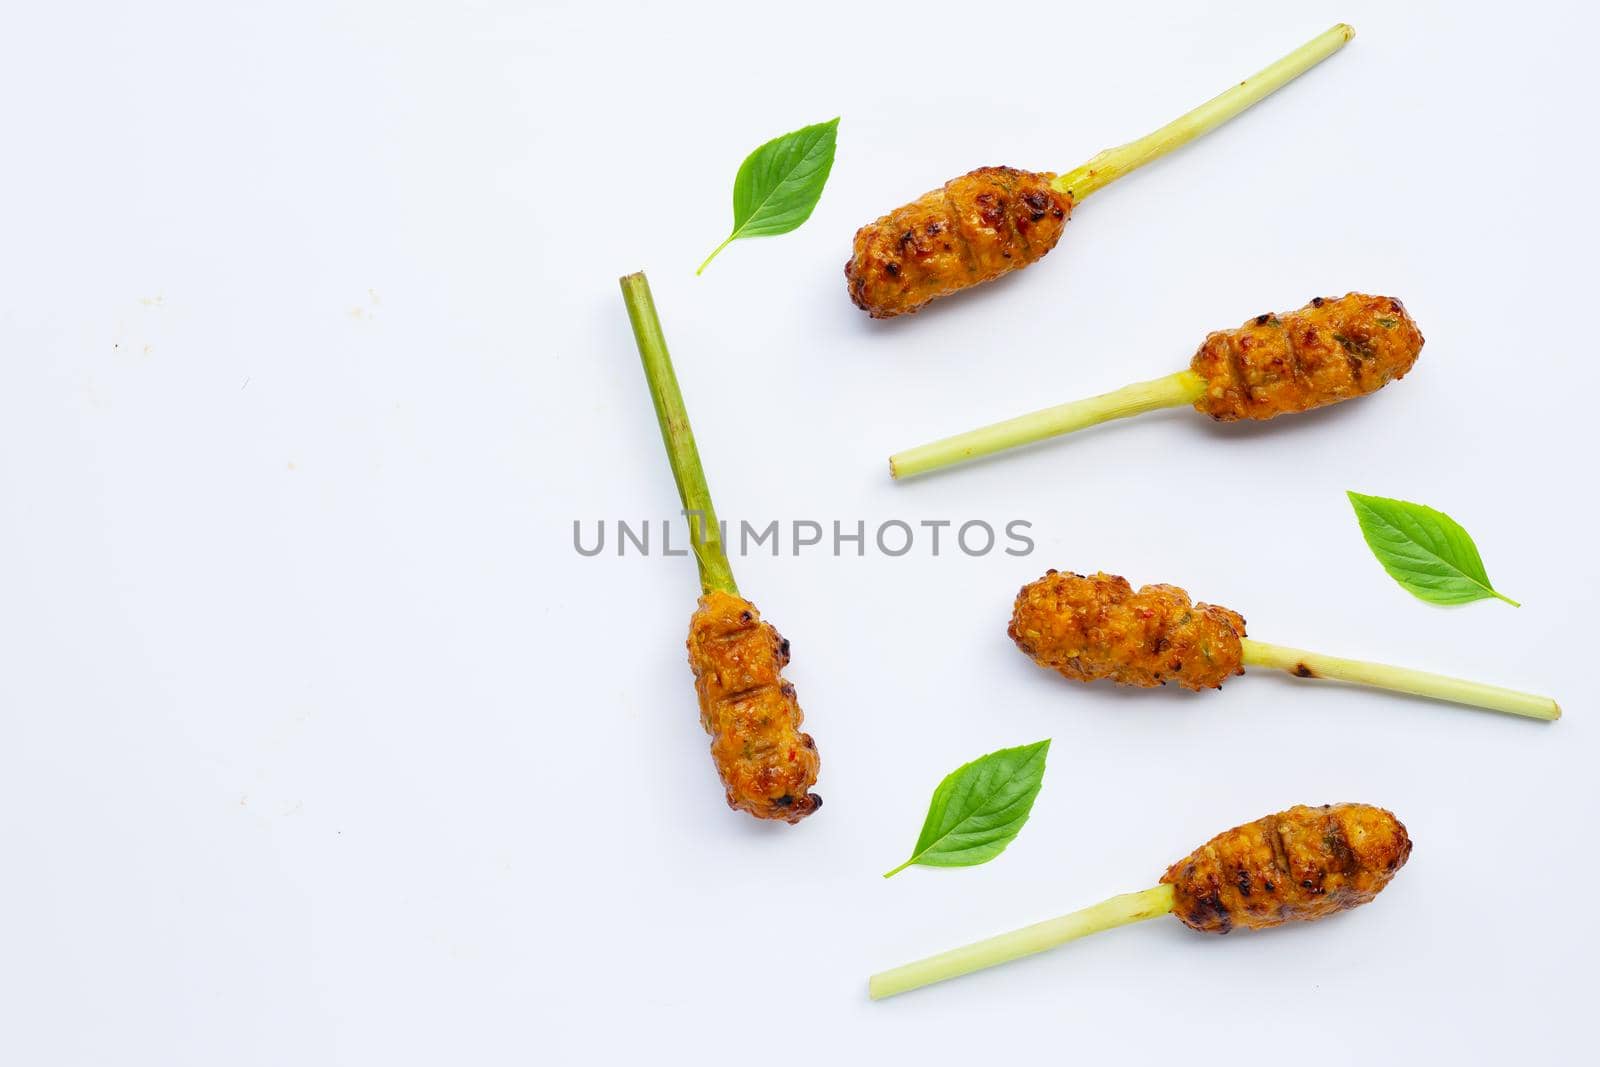 Grilled minced chicken with curry paste and coconut cream on lemongrass skewers. Top view